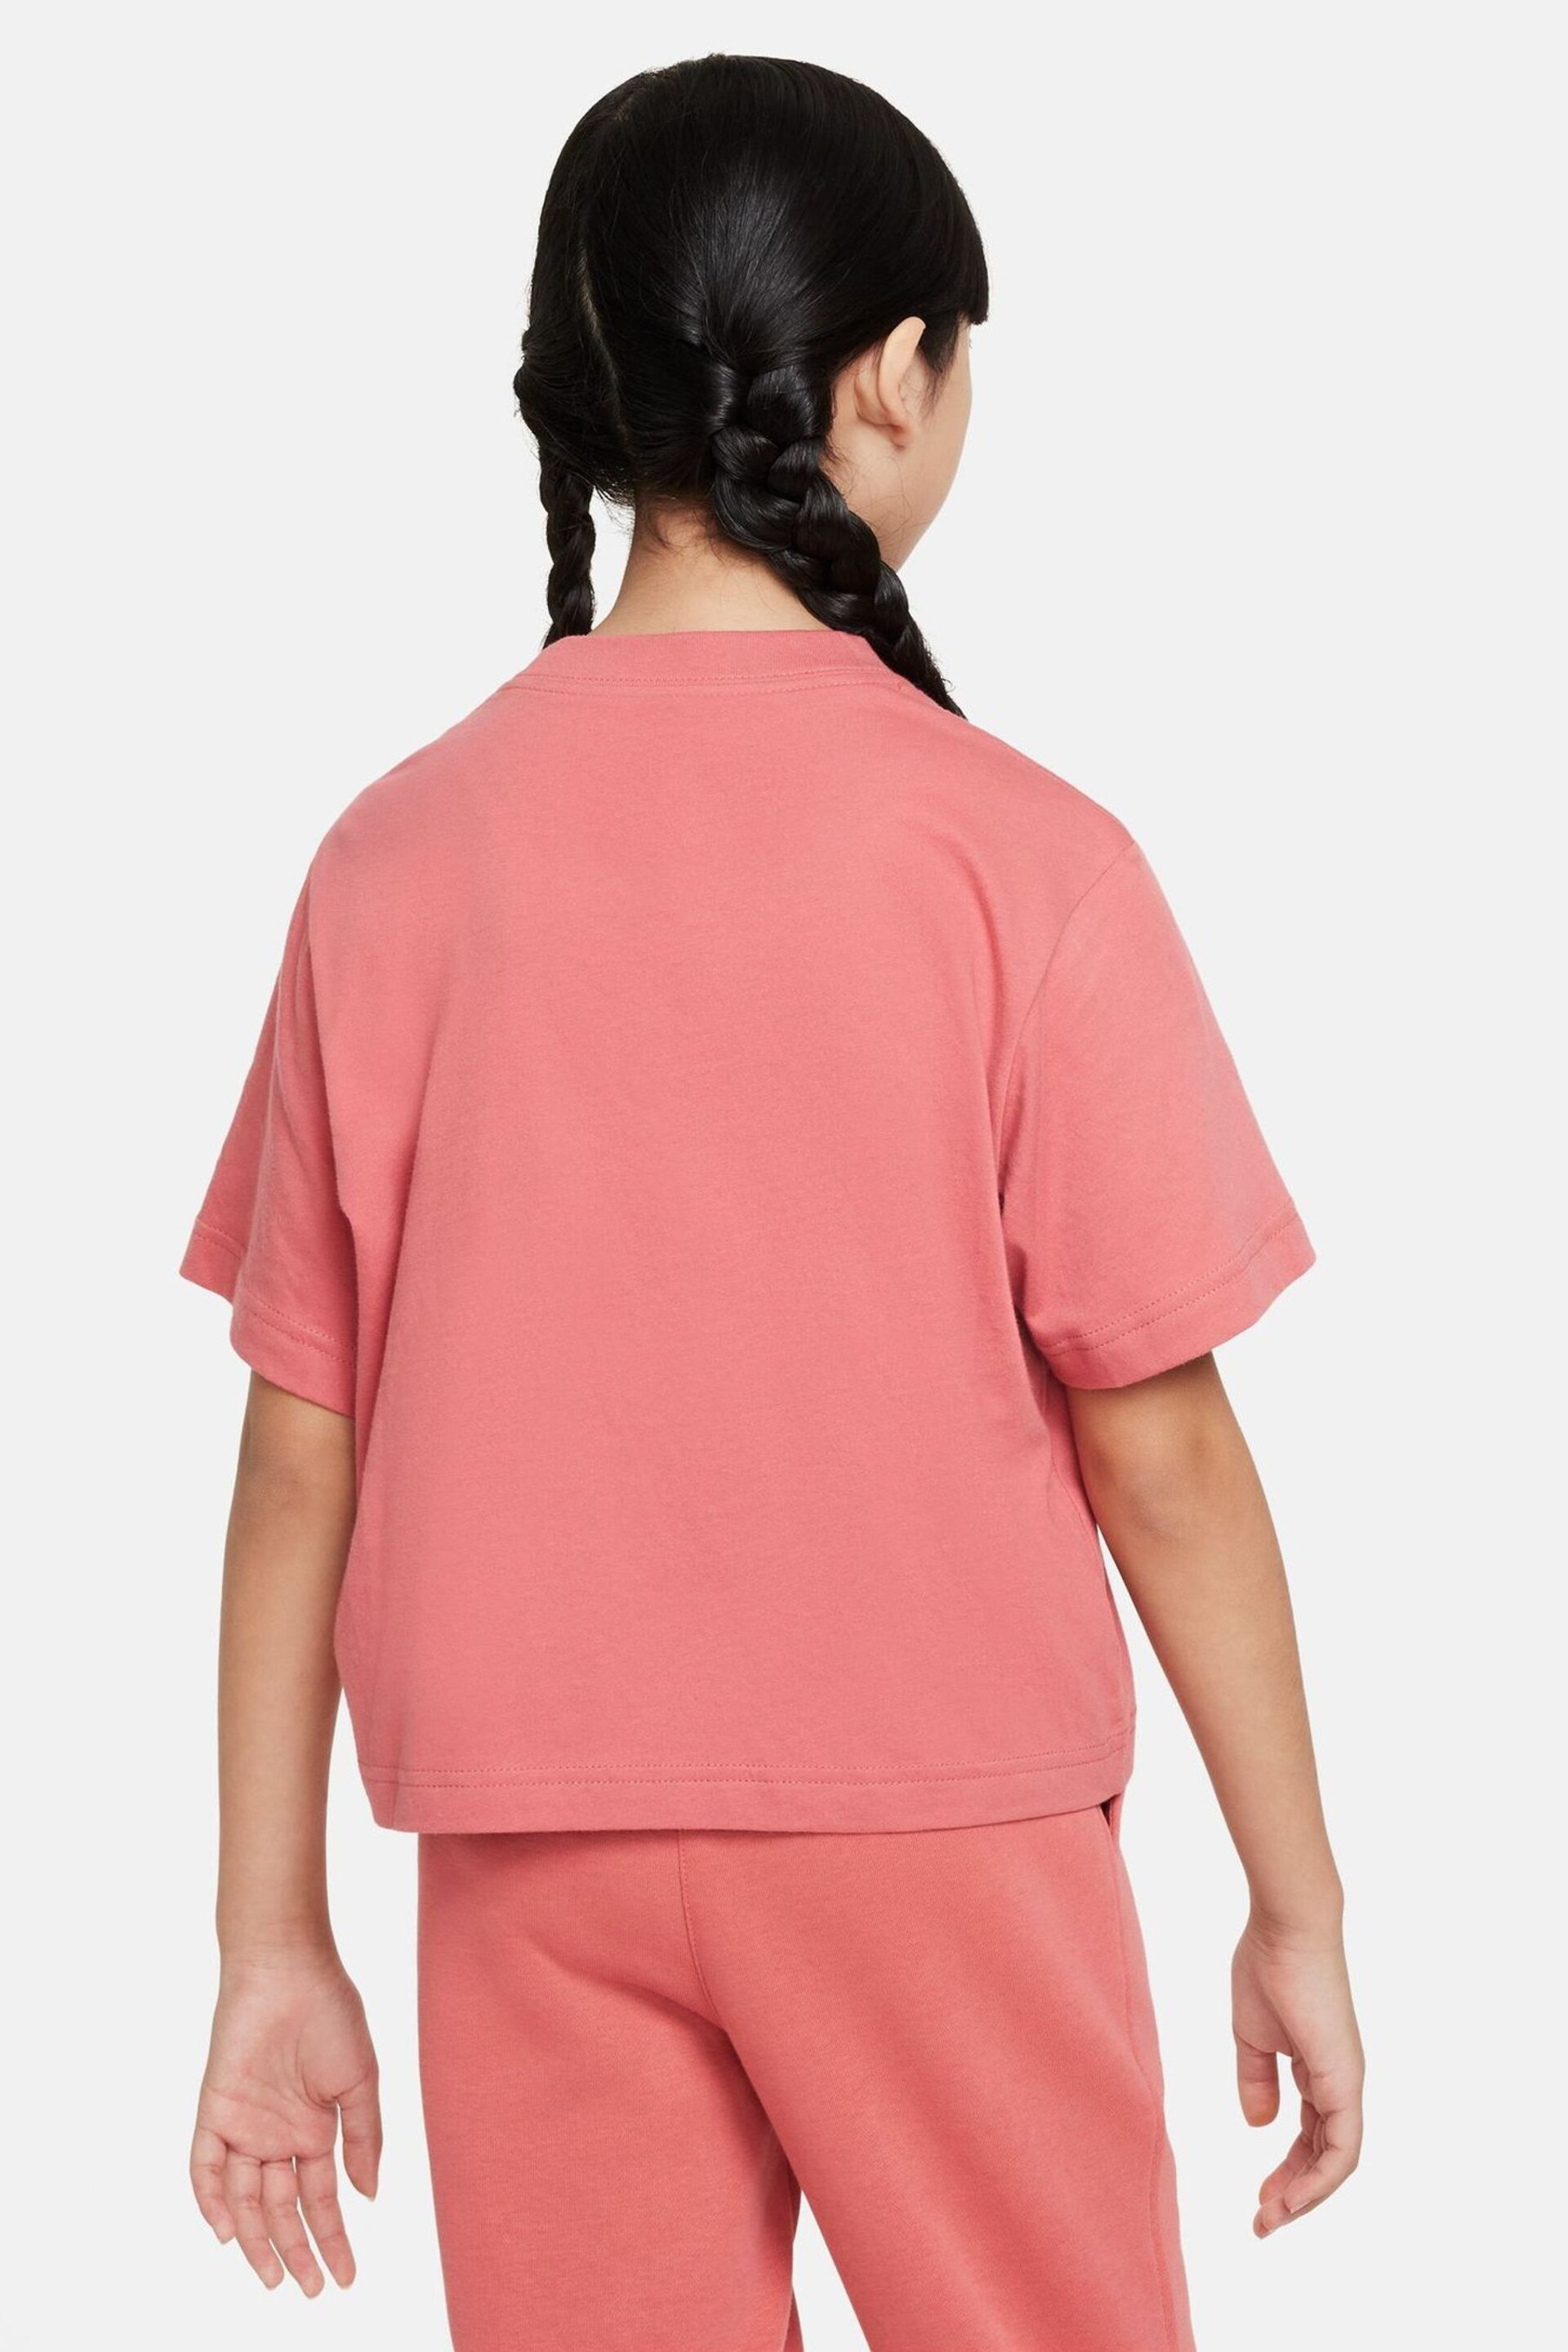 Nike Red Oversized Essentials Boxy T-Shirt - Image 2 of 4